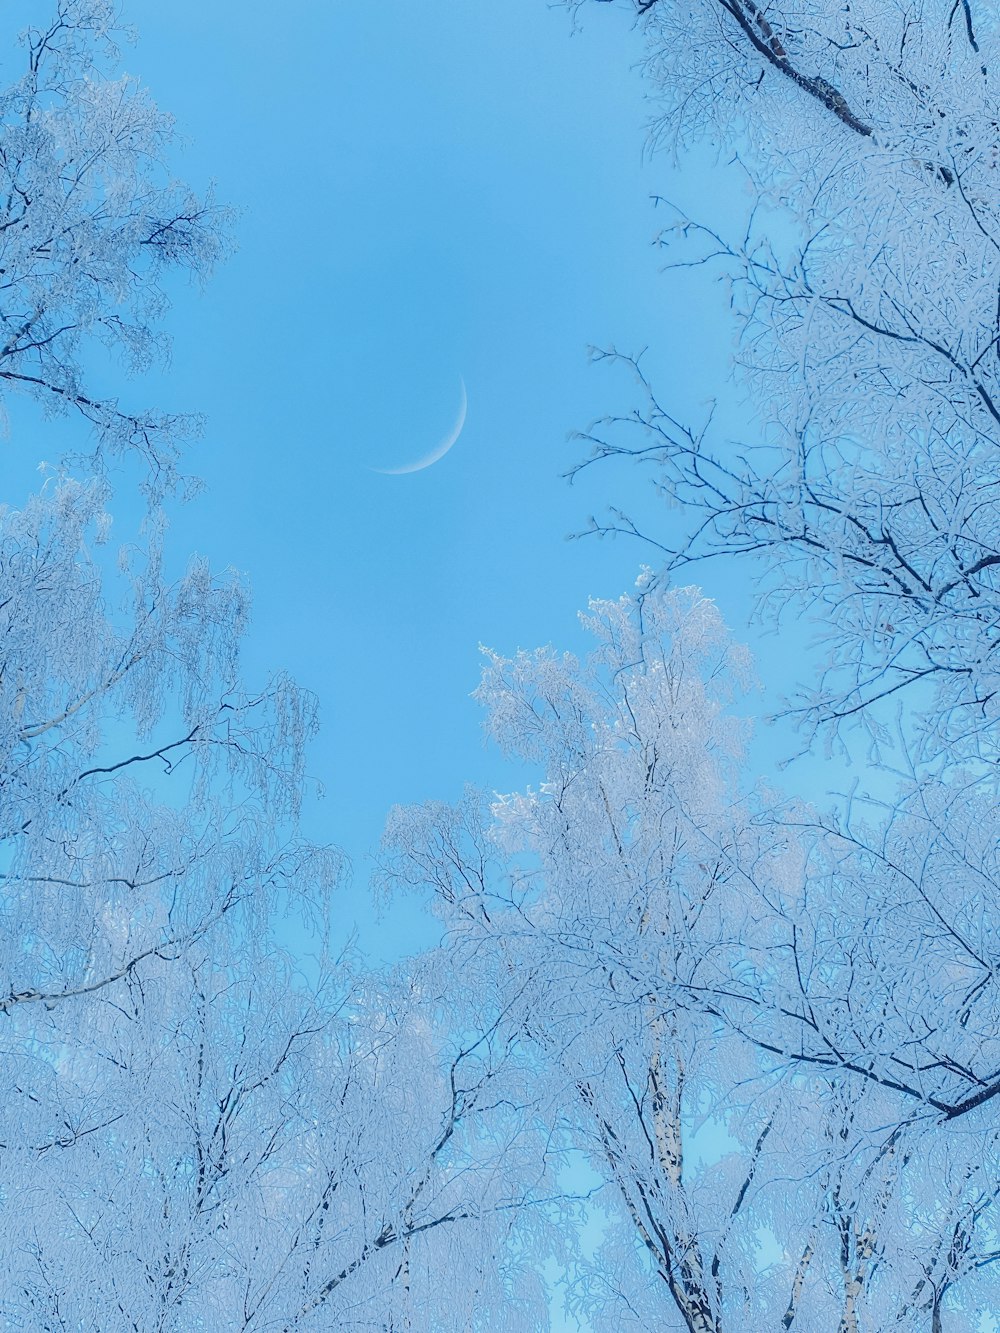 the moon is visible through the trees in the sky